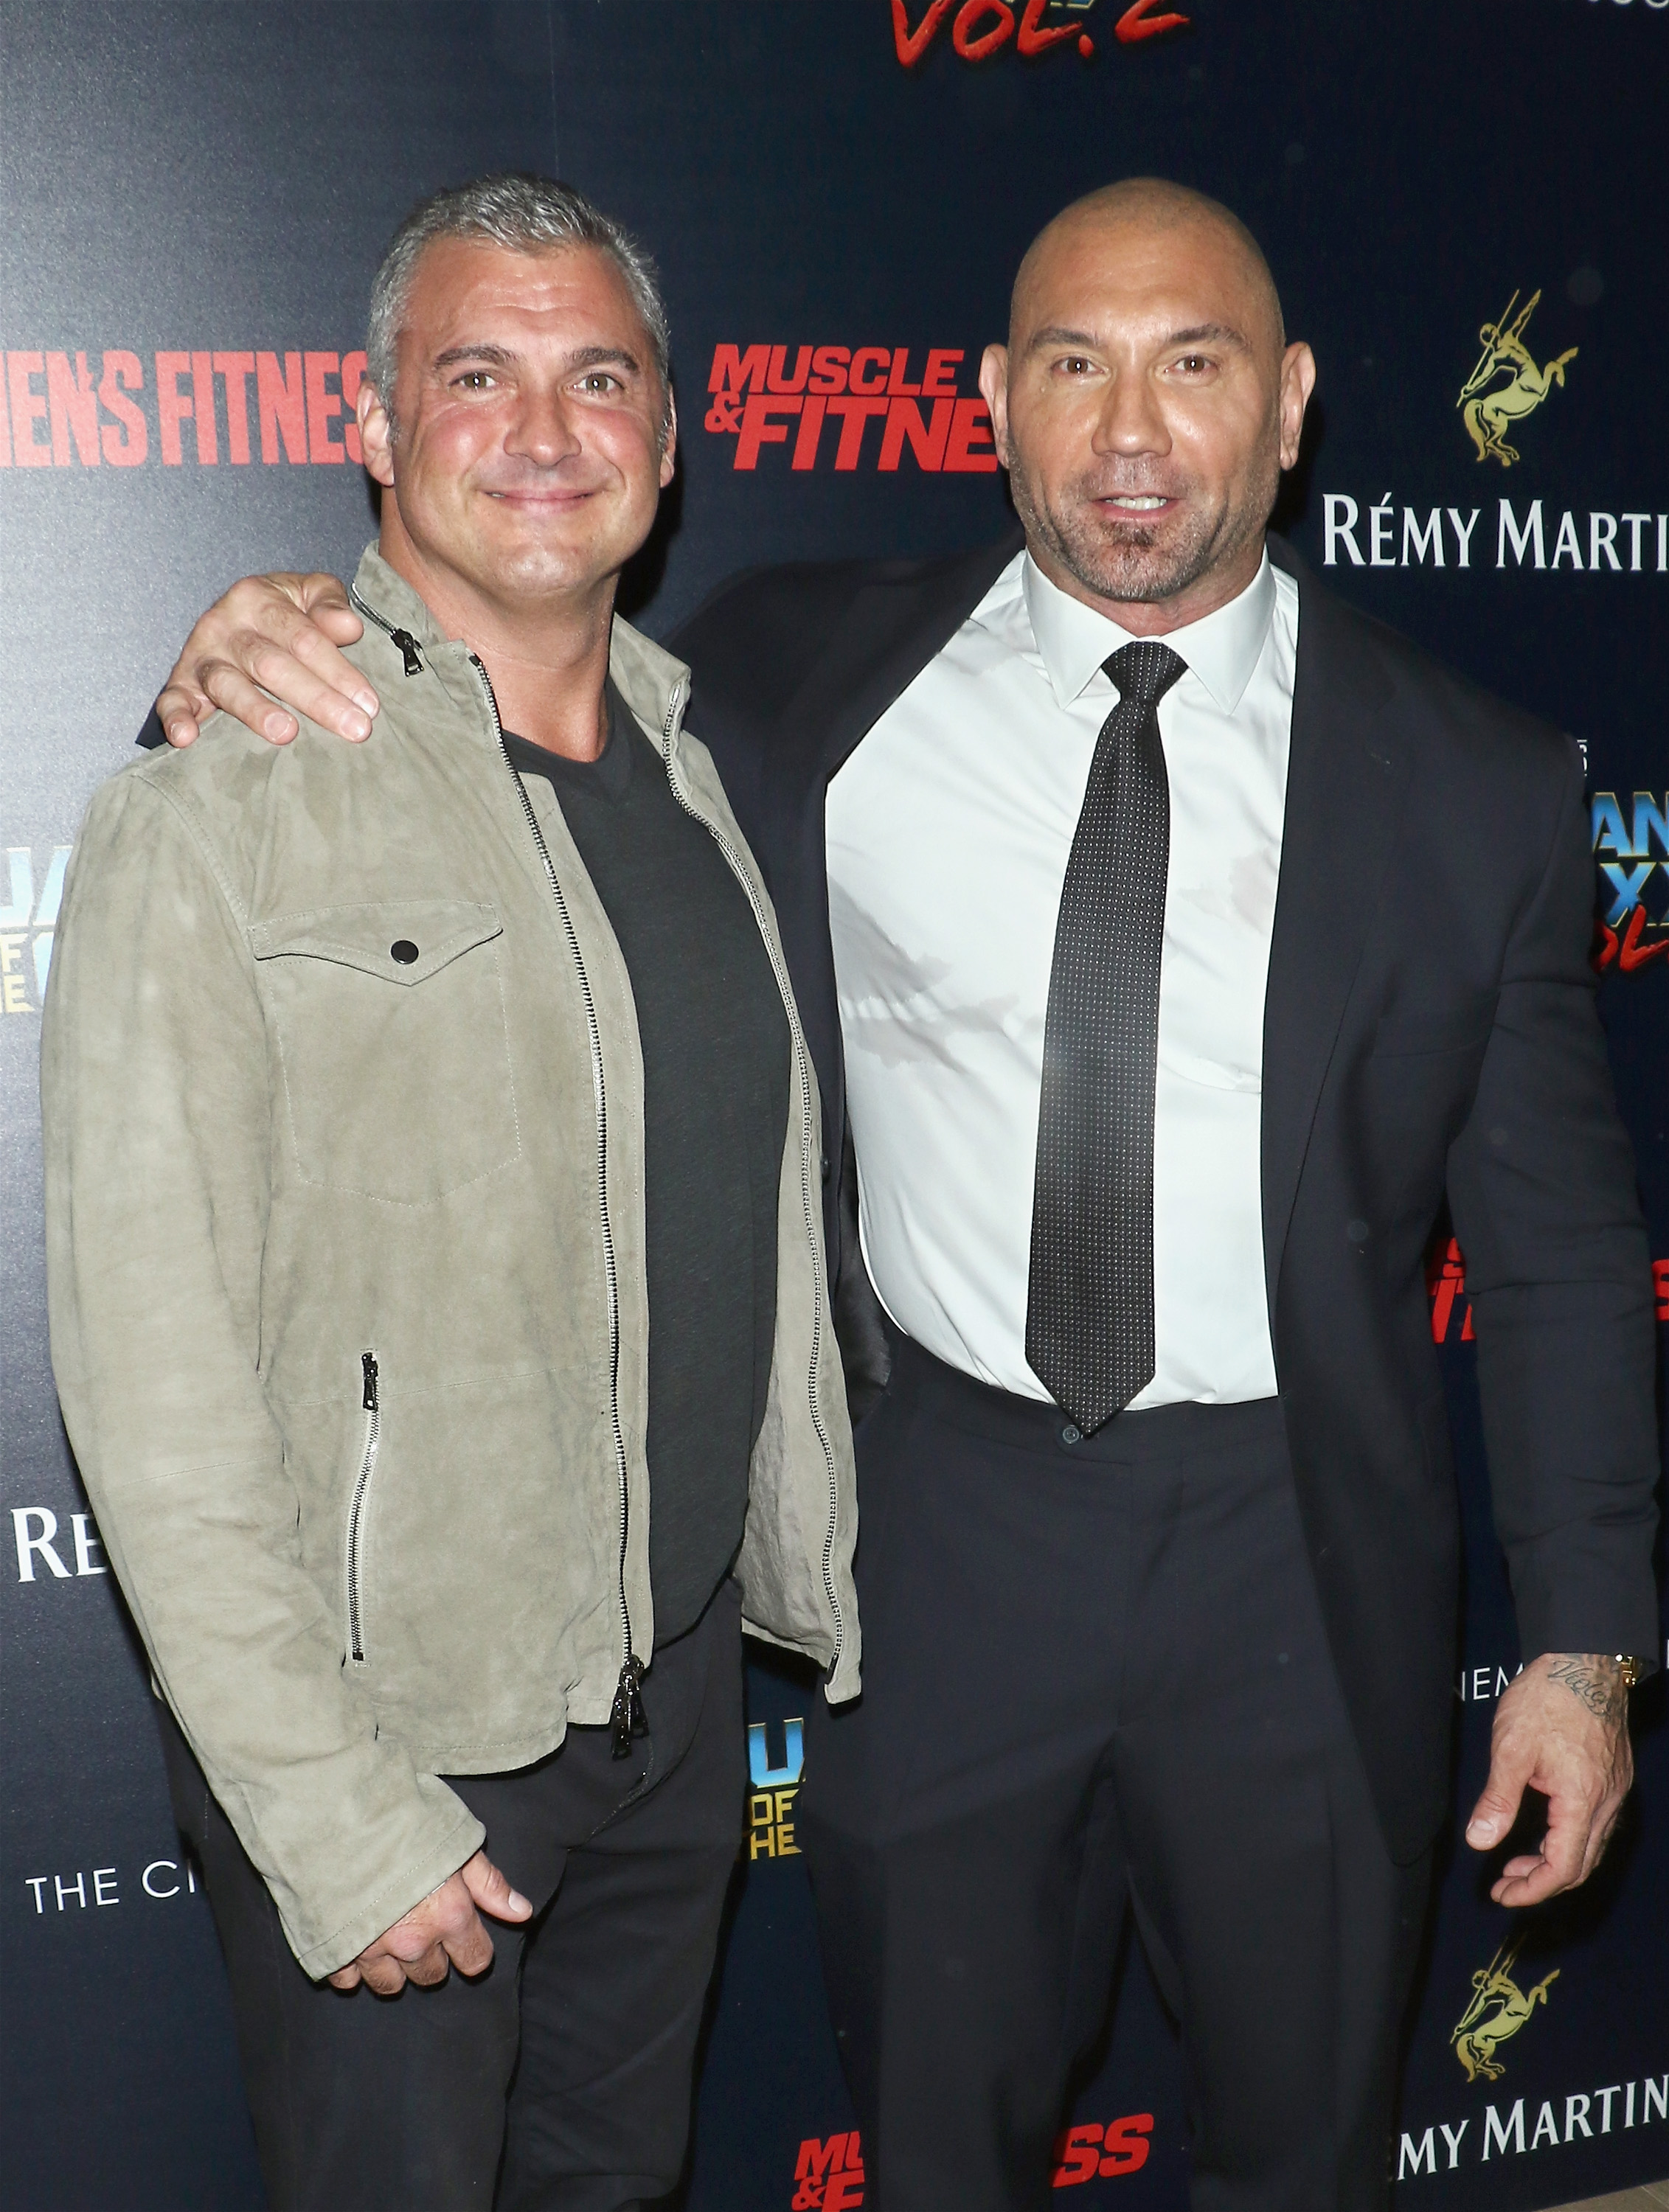 Former WWE Star Dave Bautista Lands Big Role in Major Hollywood Movie, News, Scores, Highlights, Stats, and Rumors